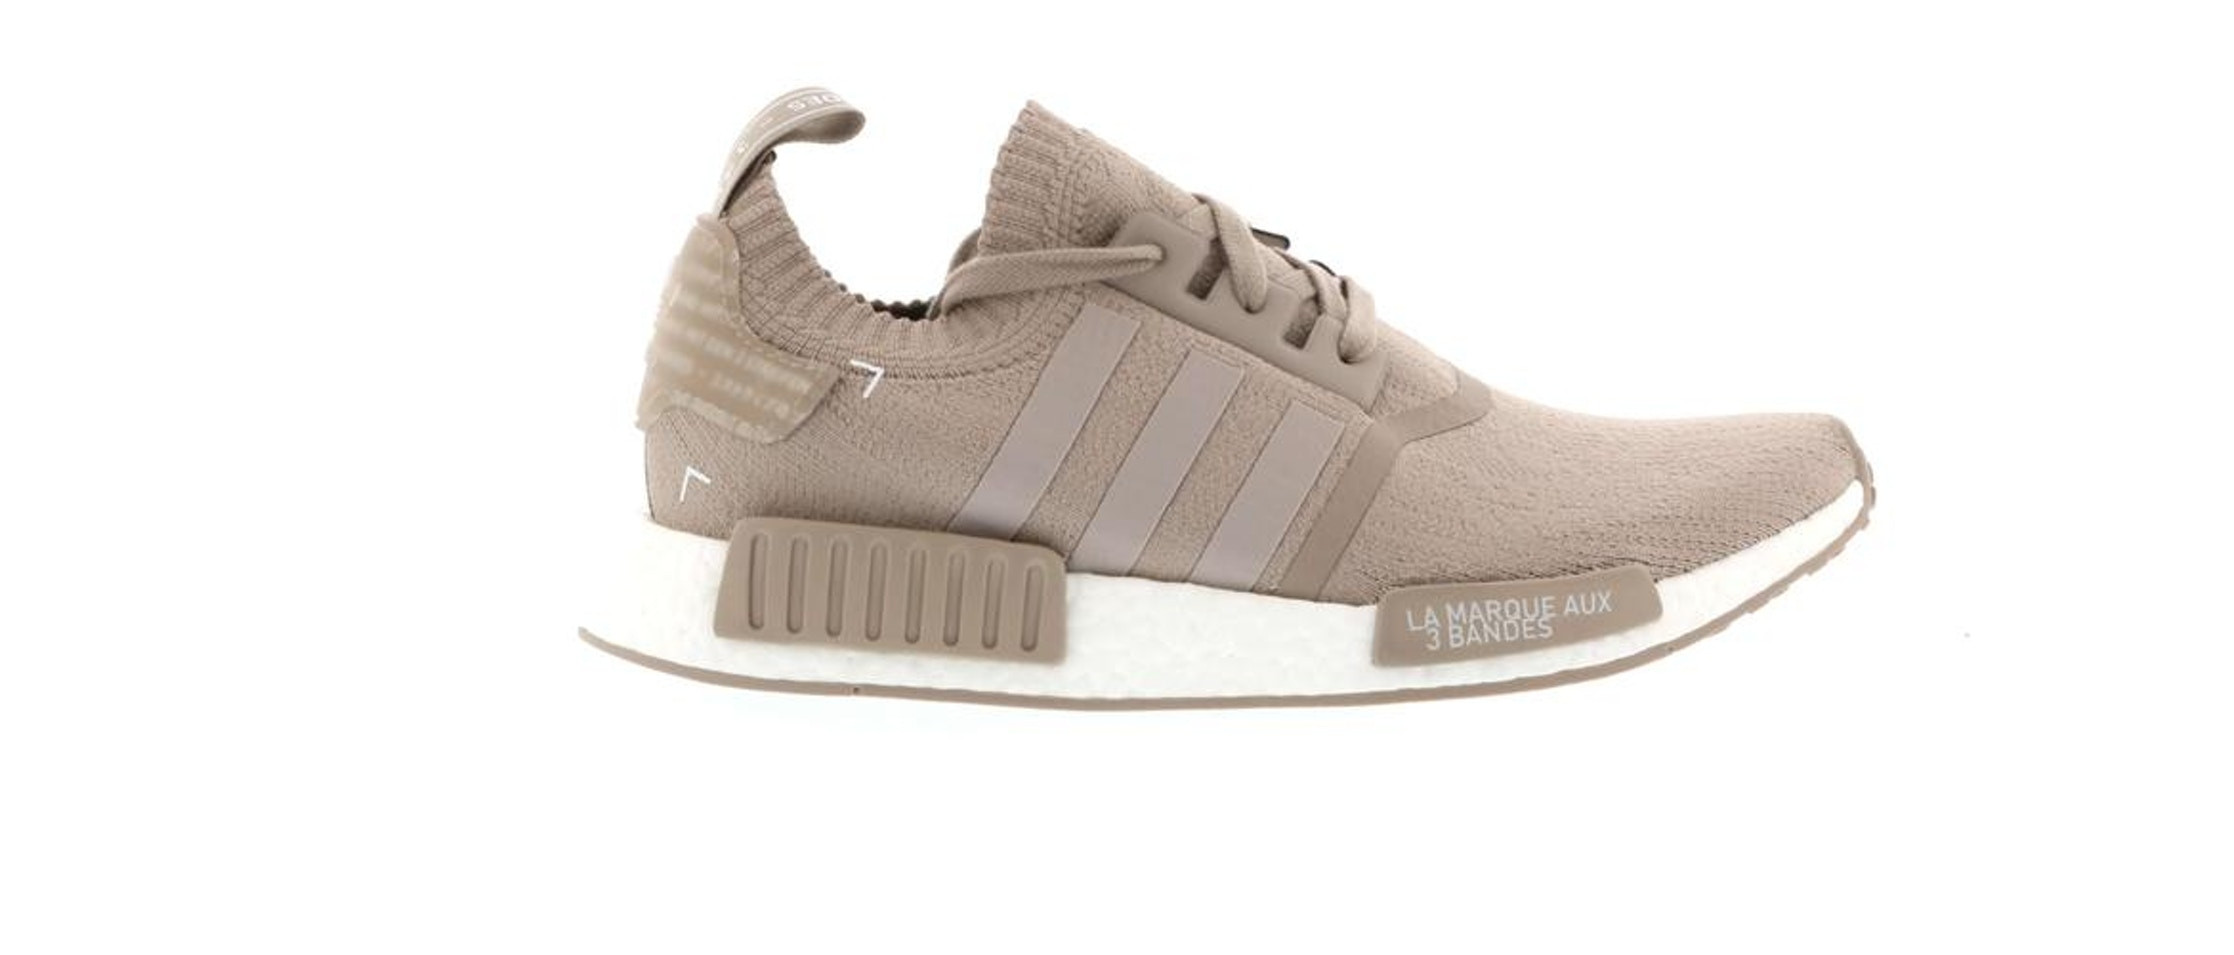 NMD R1 "French Beige"